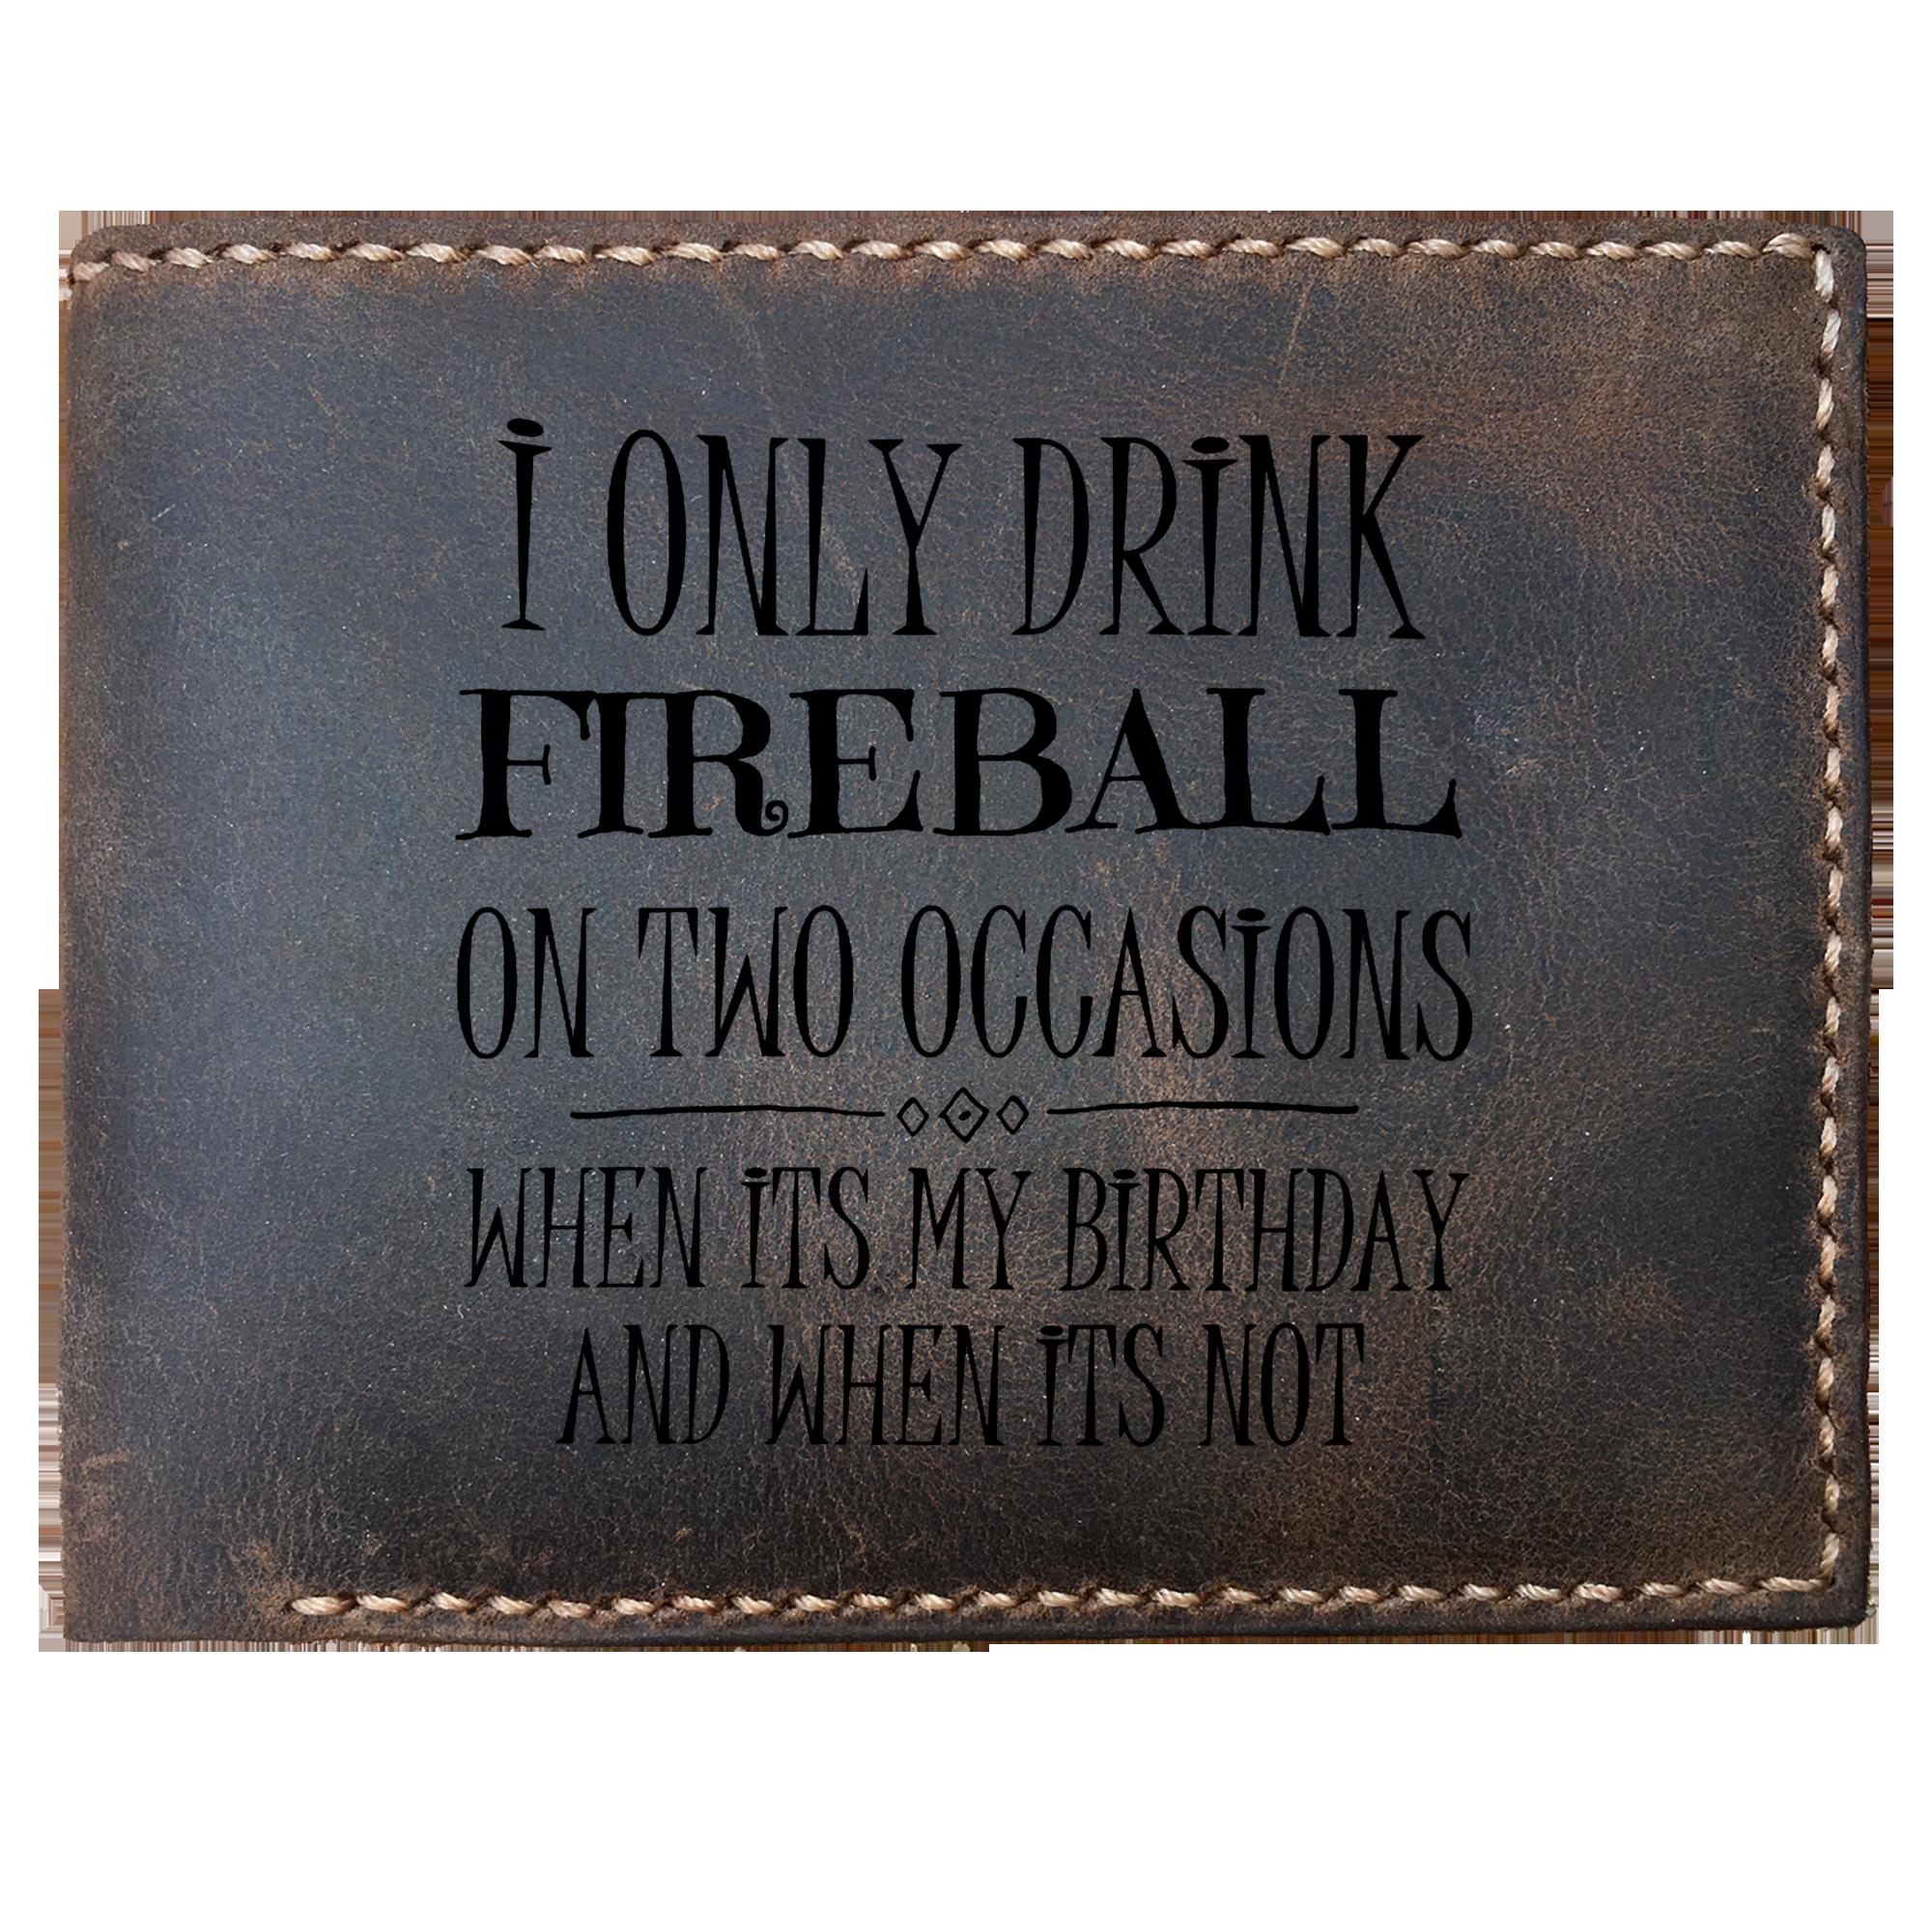 Skitongifts Funny Custom Laser Engraved Bifold Leather Wallet For Men, I Only Drink Fireball On Two Occasions